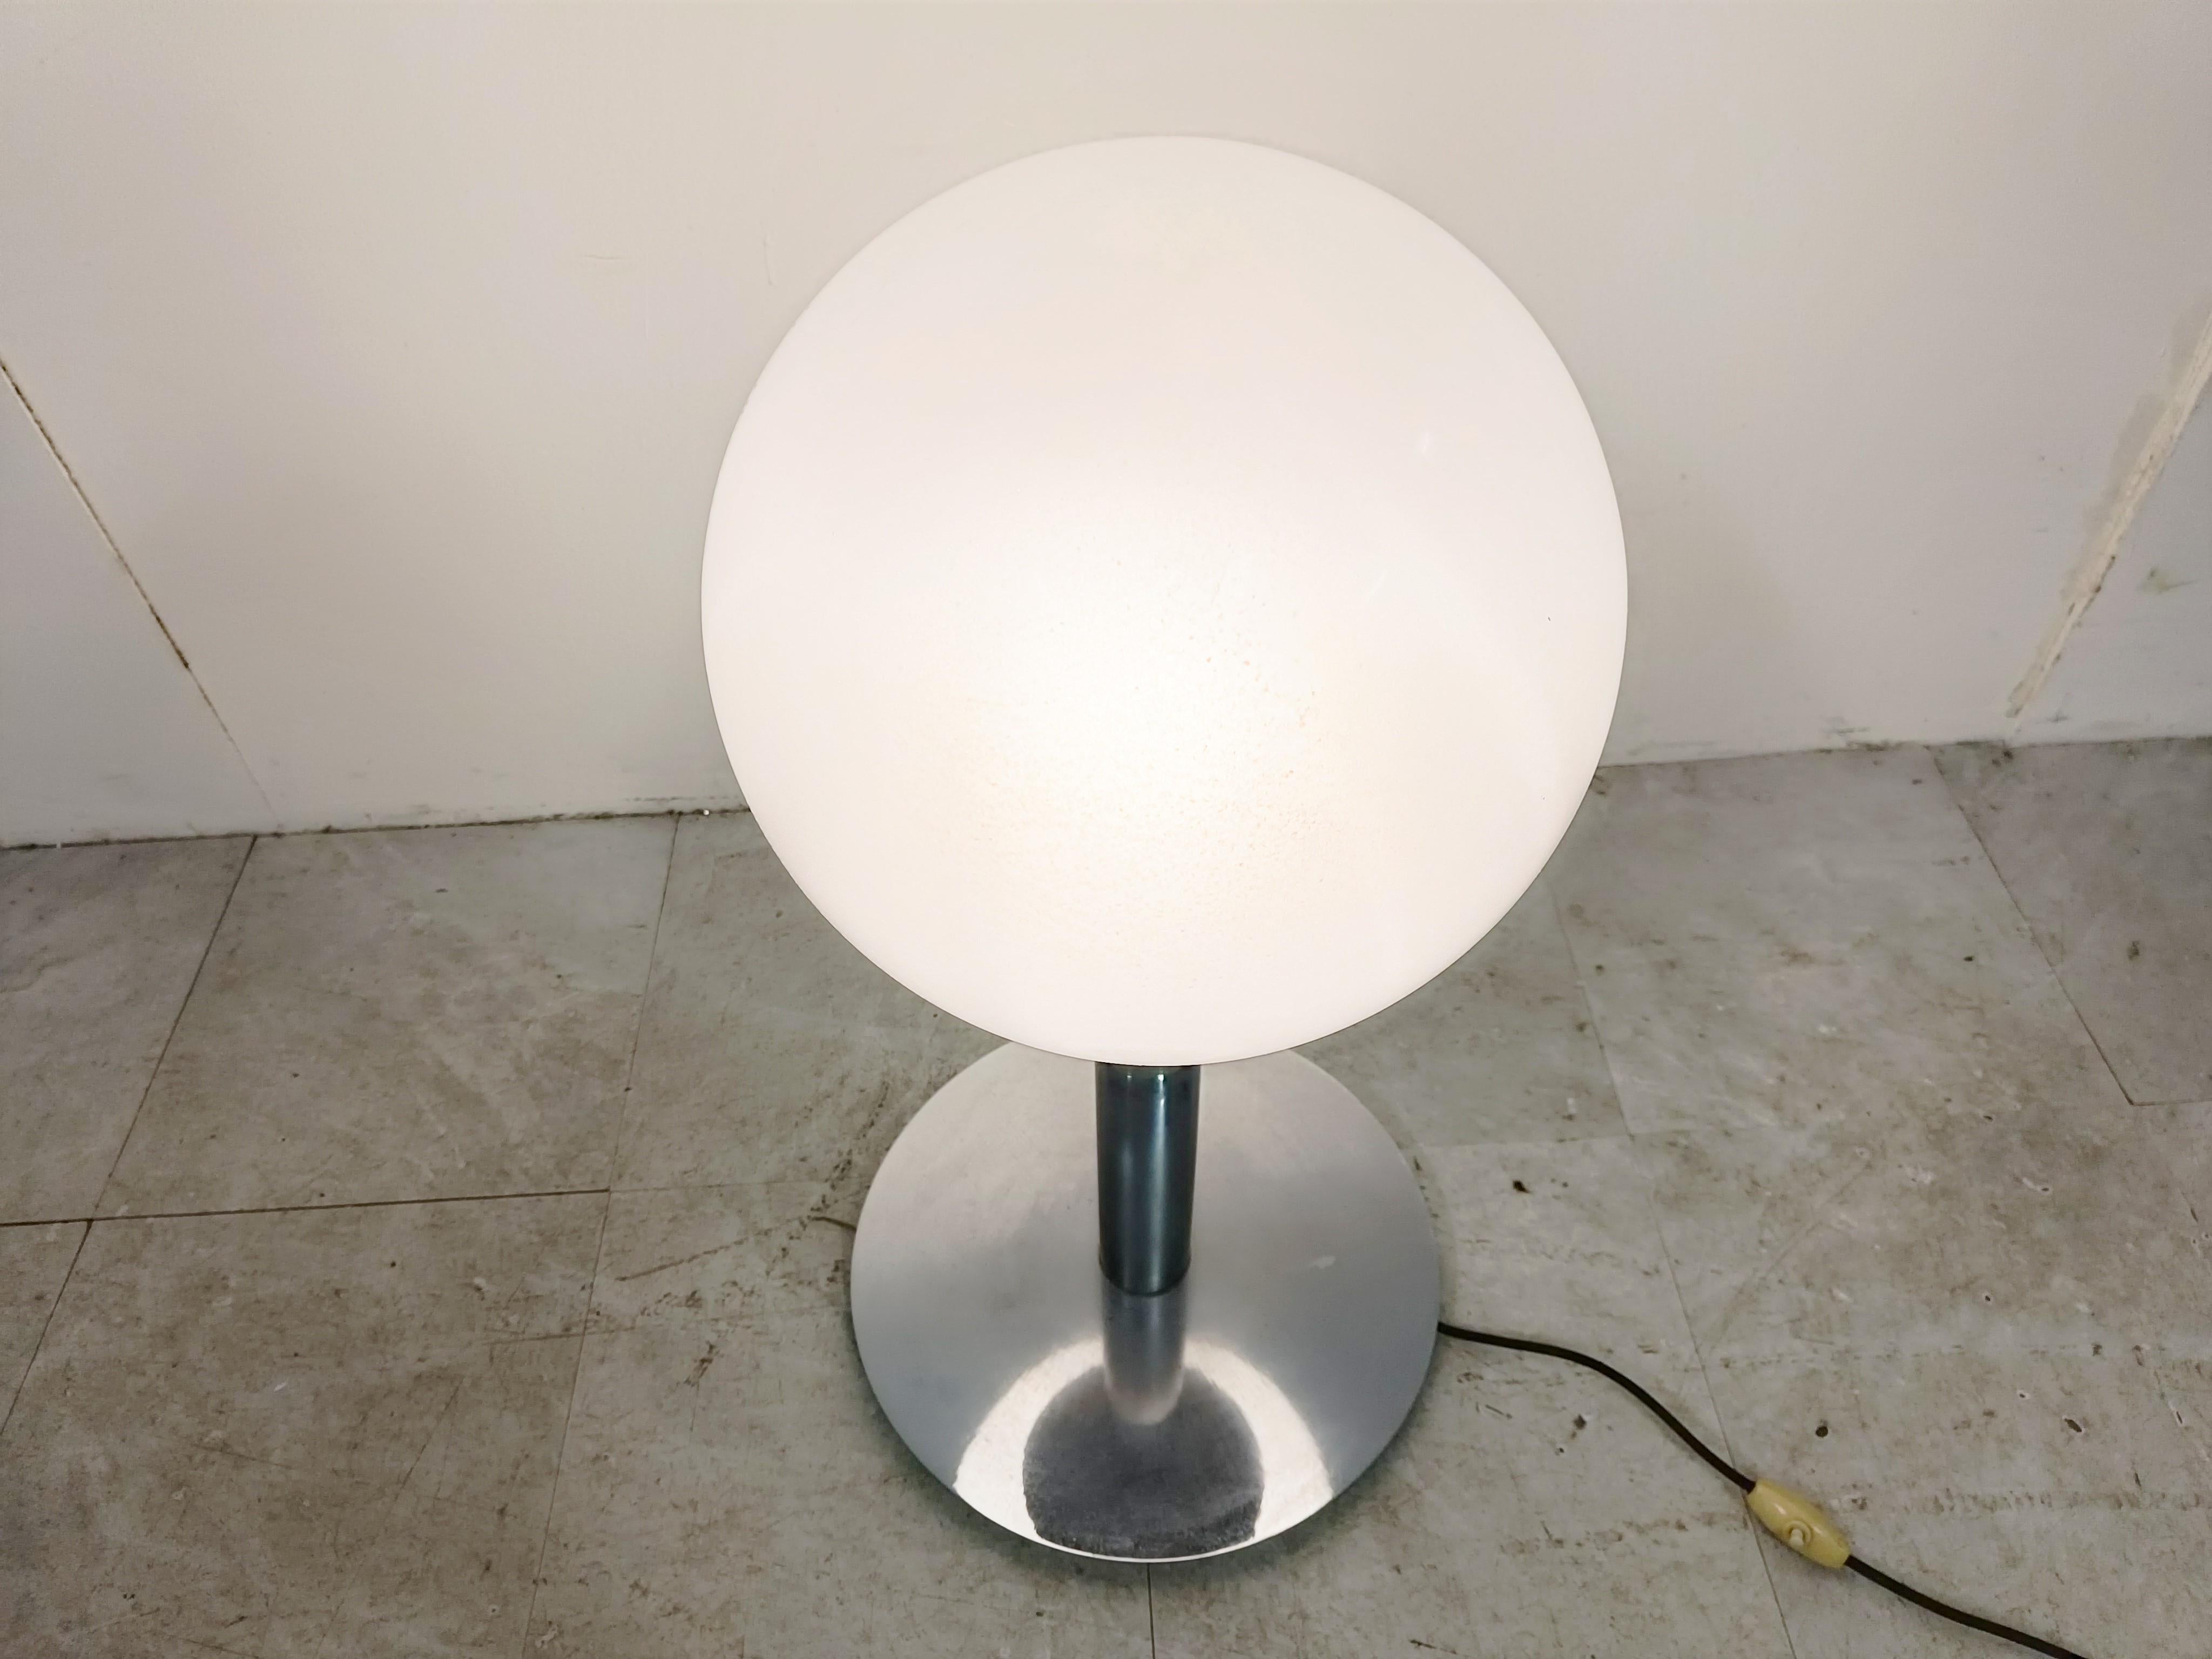 Mid century table lamp with a chrome base and a glass globe shade.

Cool vintage table lamp which emits a nice dimmed light.

Good condition, tested and ready to use.

1960s - Italy

Height: 50cm/19.68